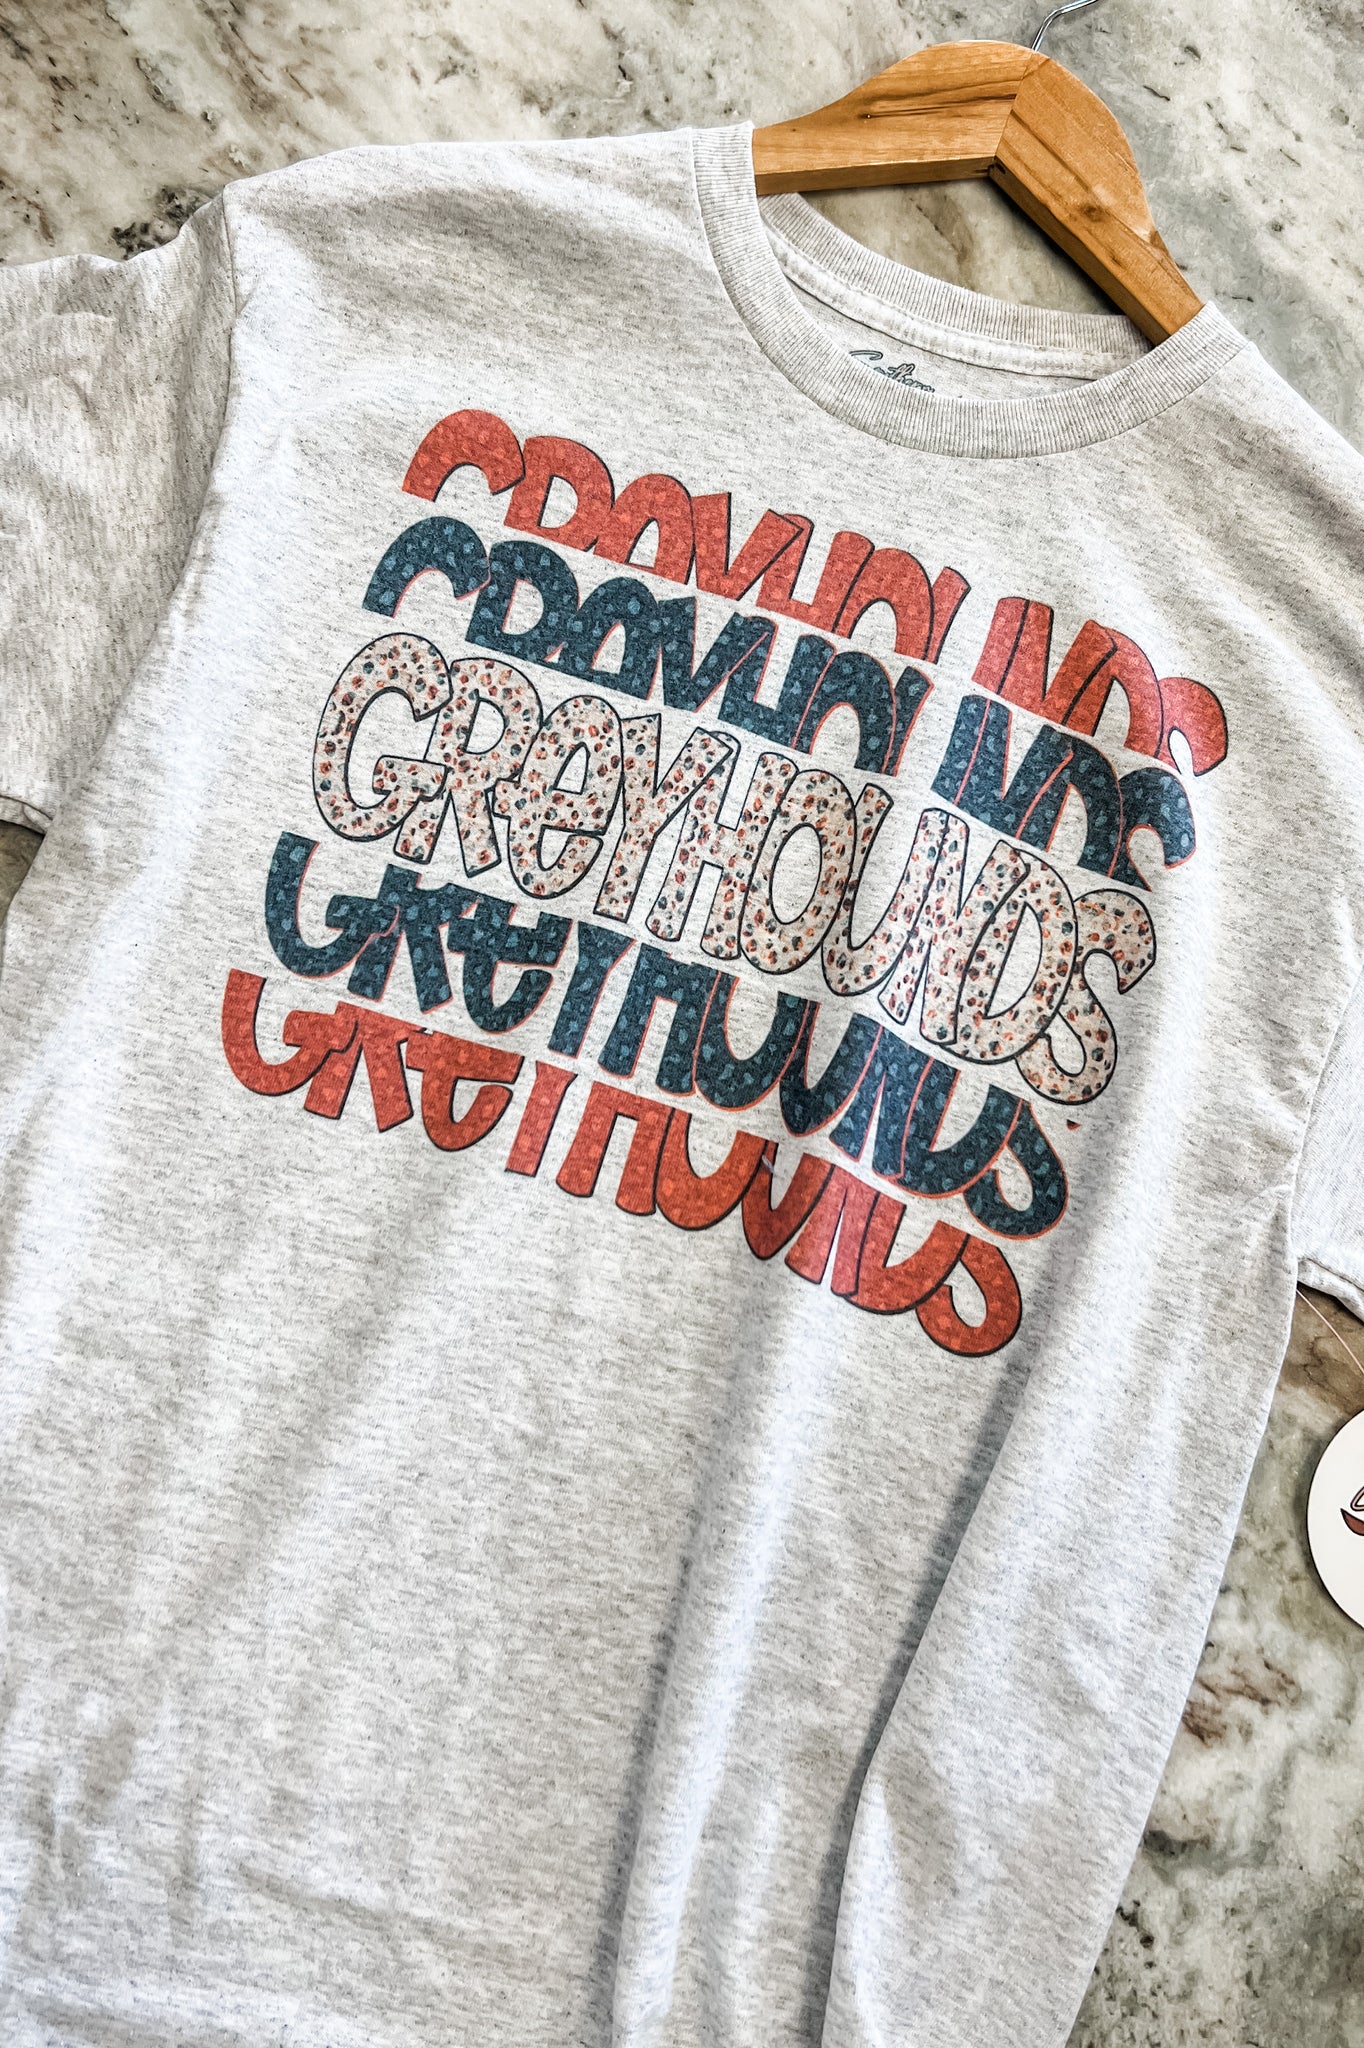 Greyhounds Stacked Graphic Tee